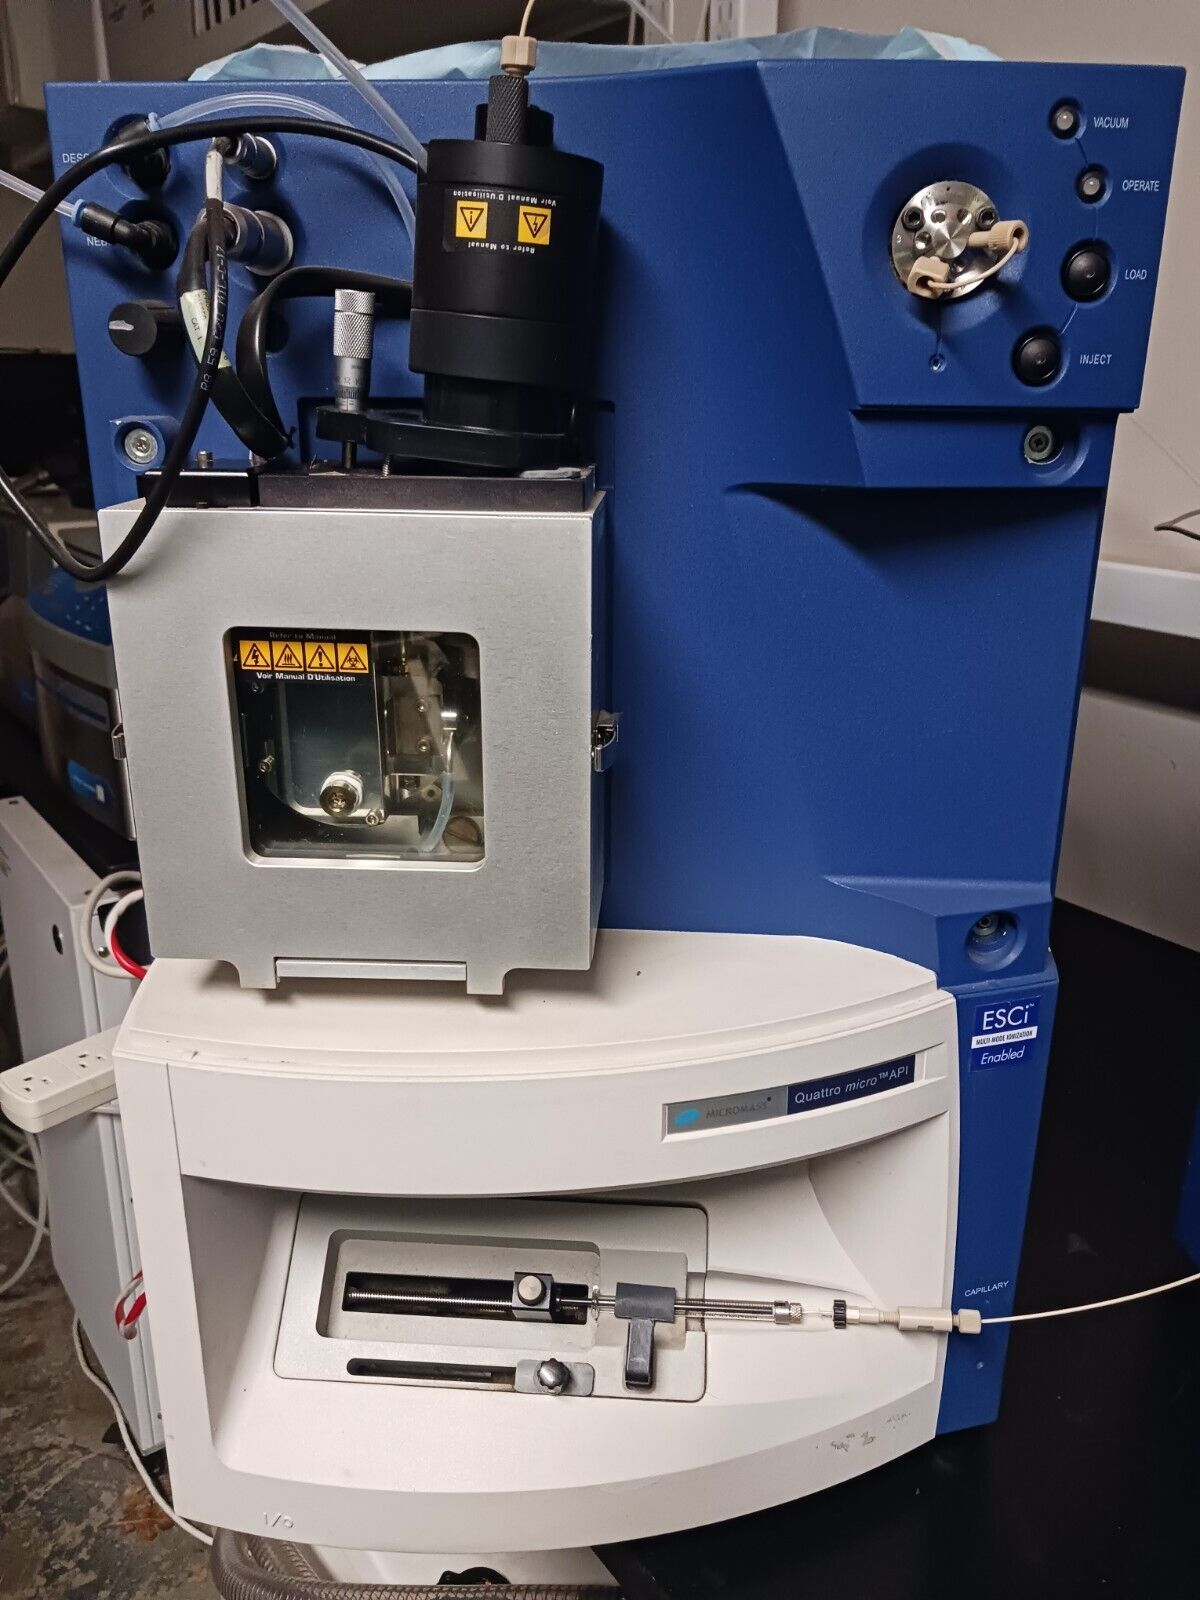 Waters Quattro Micro Mass Spectrometer in working condition. 